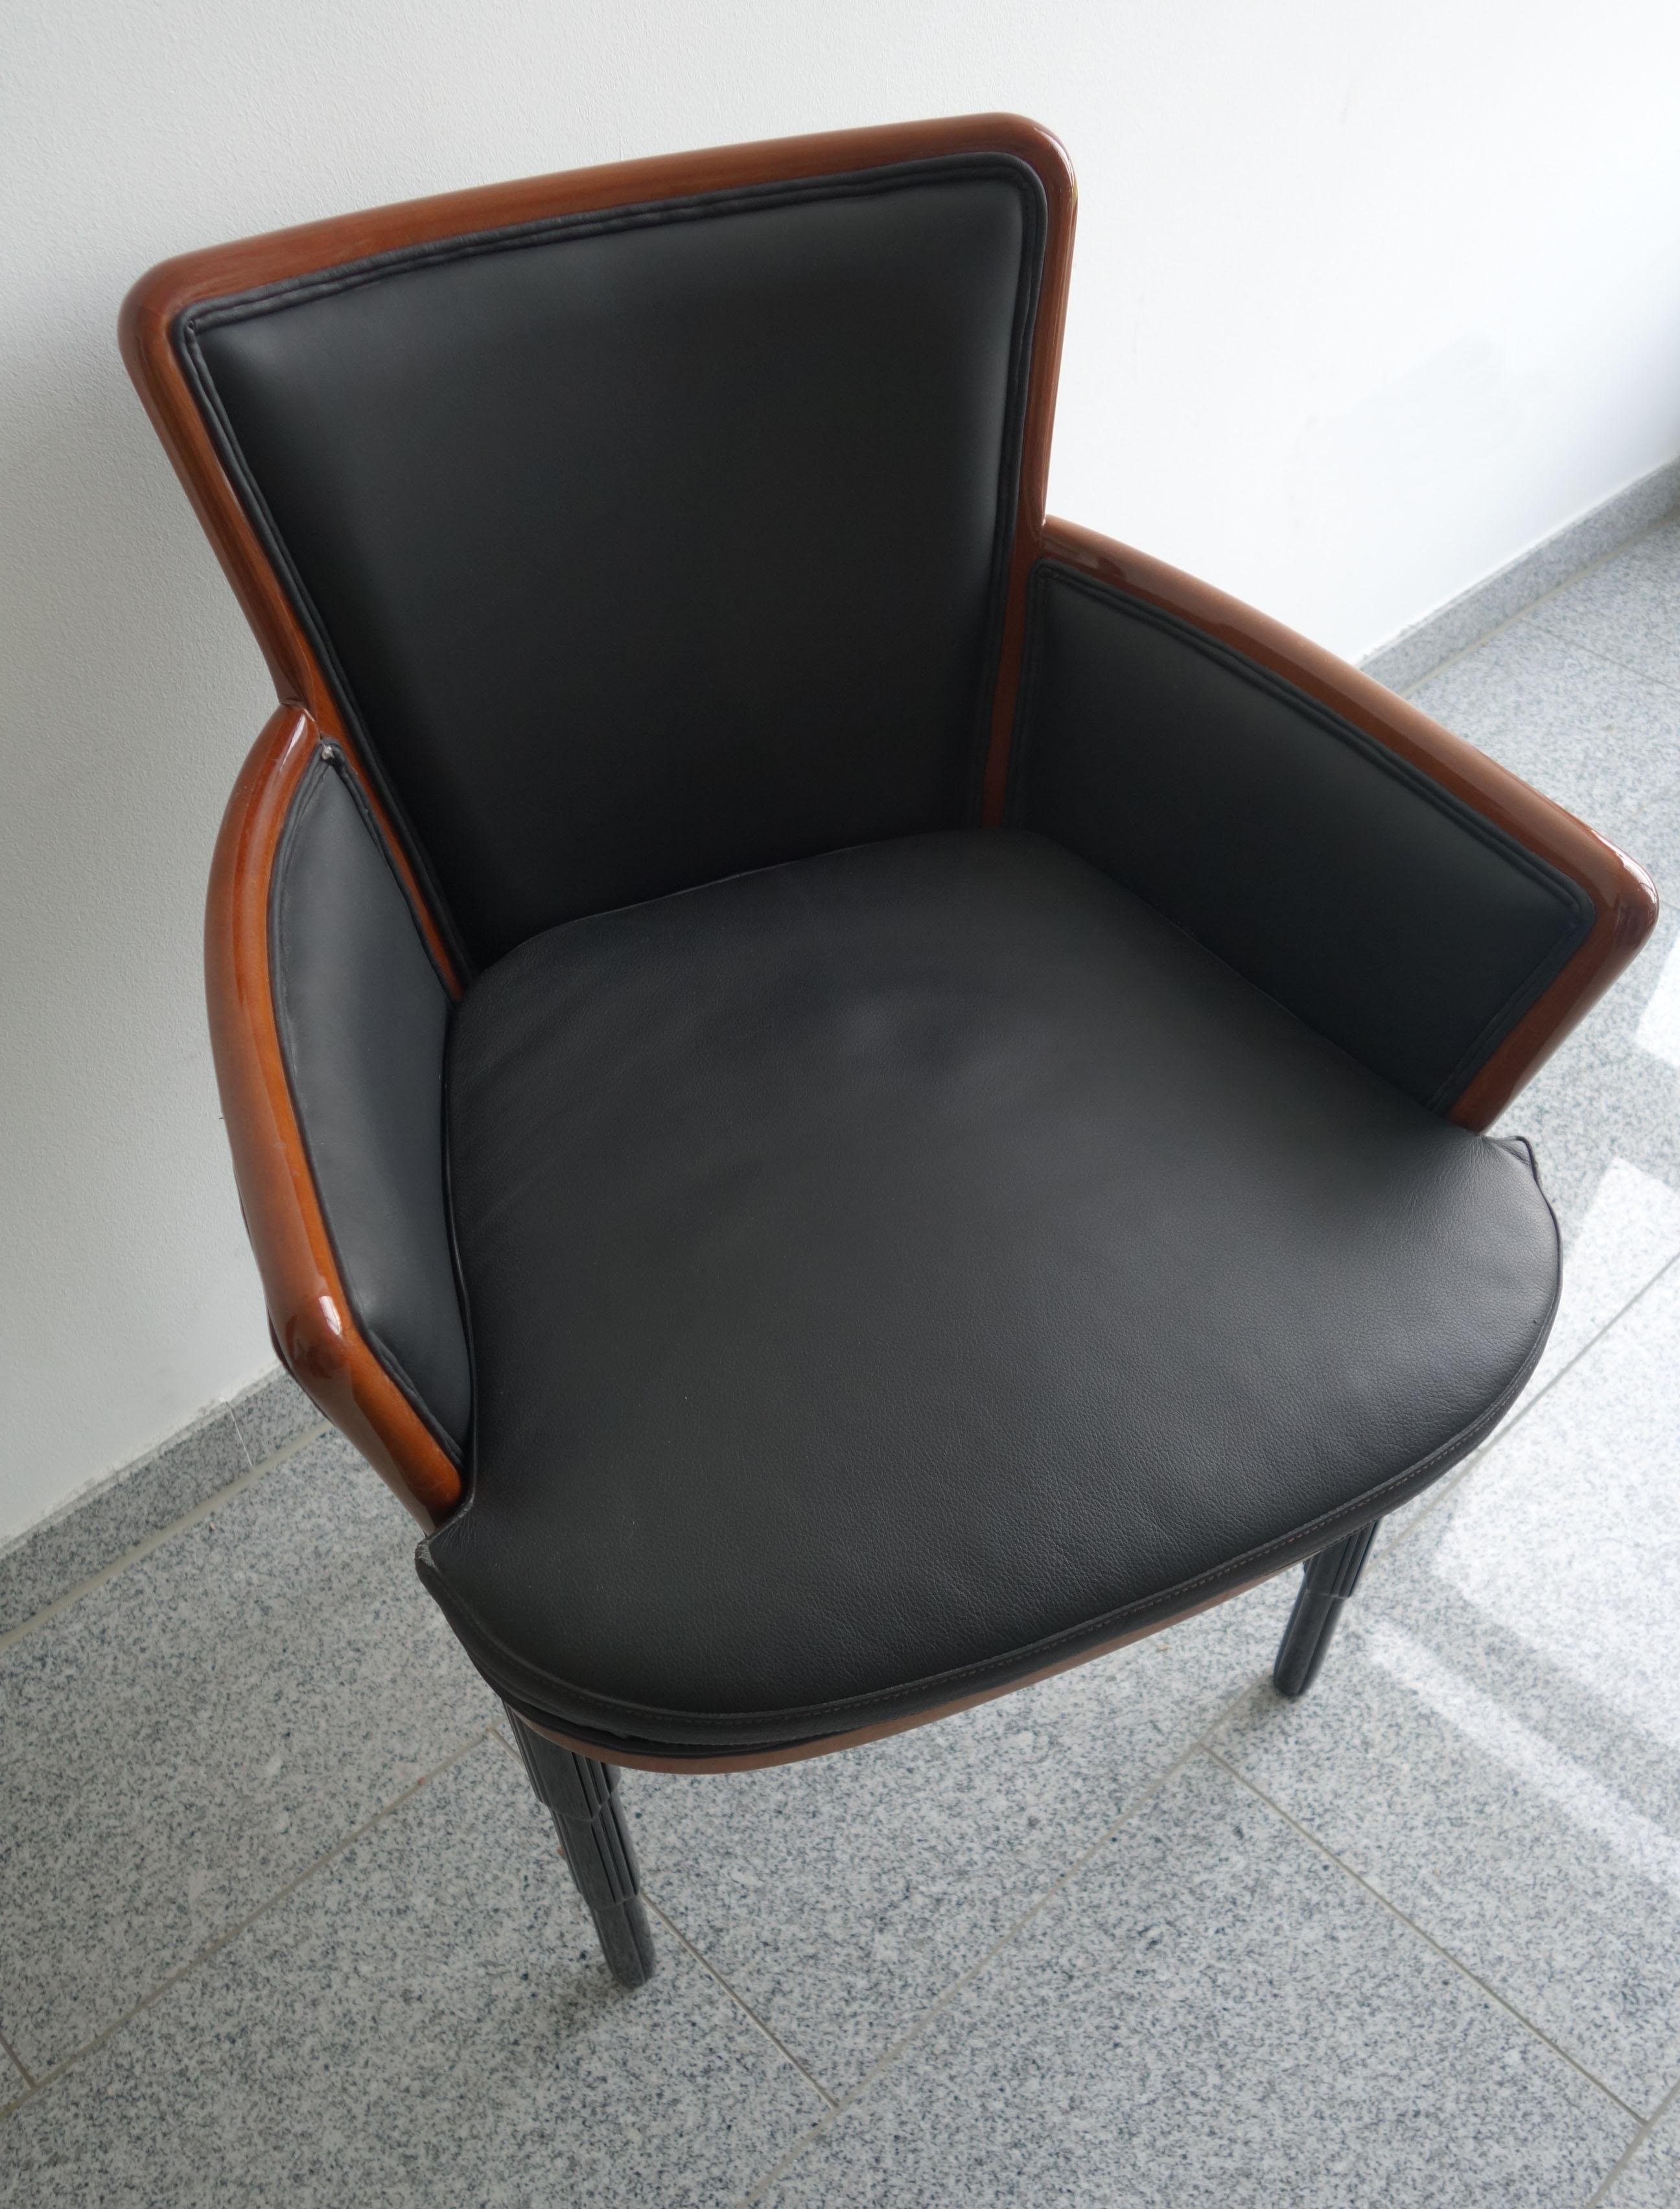 This beautiful armchair is made with a rounded wooden frame. The legs are in stepped black wood and the armchair is upholstered in high quality black leather. 
The chair was not used.
 